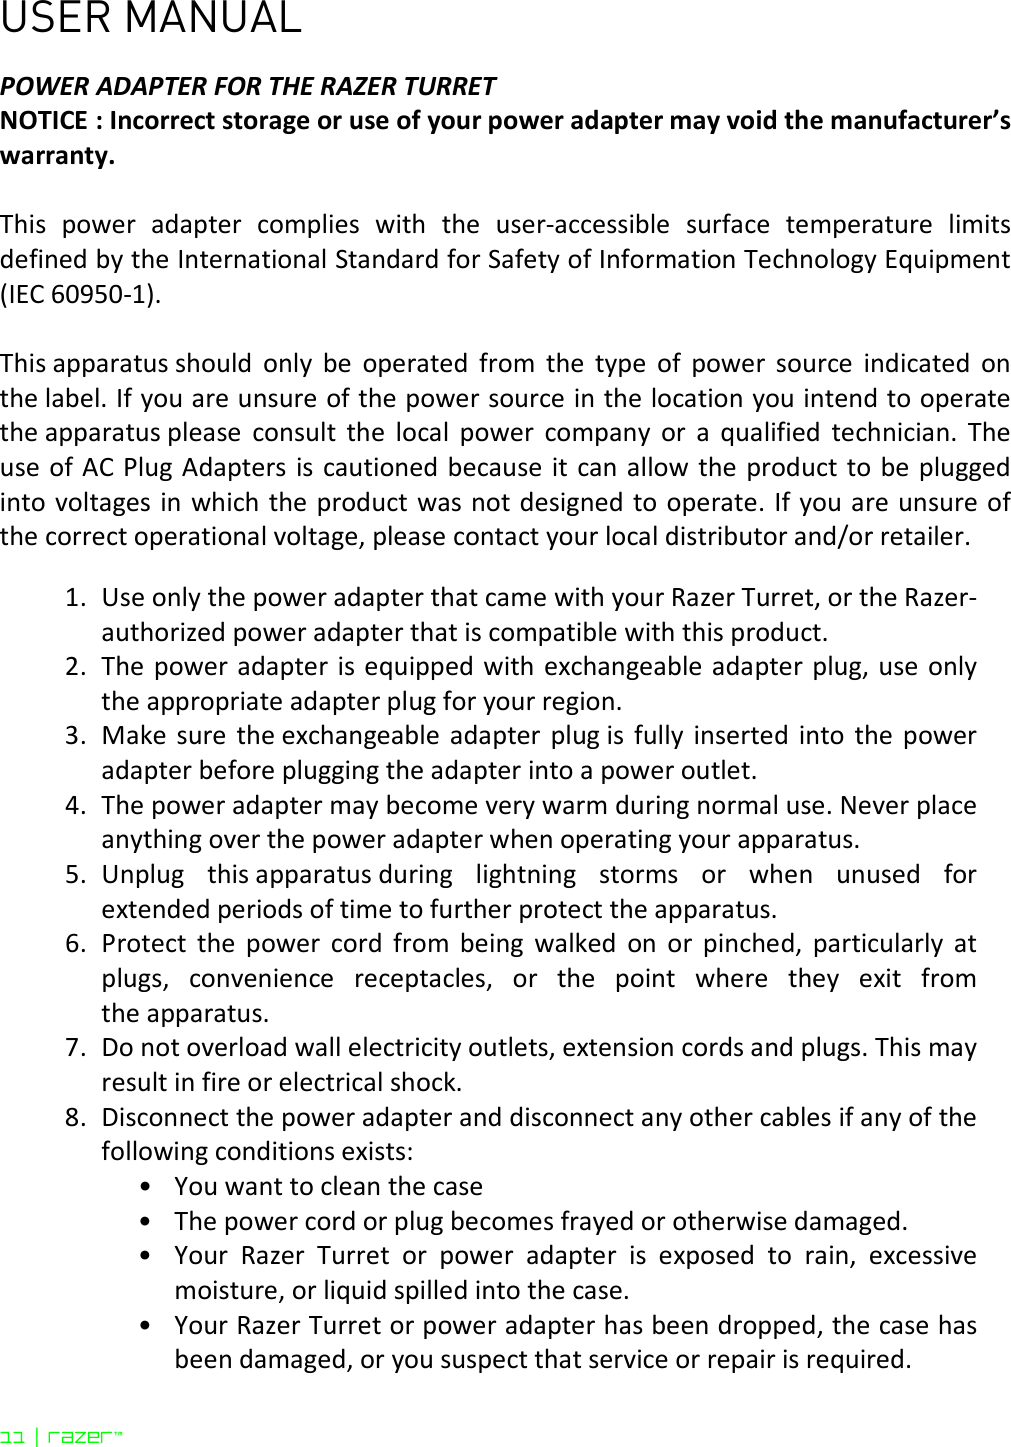 USER MANUAL 11 | razer™  POWER ADAPTER FOR THE RAZER TURRET NOTICE : Incorrect storage or use of your power adapter may void the manufacturer’s warranty.  This  power  adapter  complies  with  the  user-accessible  surface  temperature  limits defined by the International Standard for Safety of Information Technology Equipment (IEC 60950-1).  This apparatus should  only  be  operated  from  the  type  of  power  source  indicated  on the label. If you are unsure of the power source in the location you intend to operate the apparatus please  consult  the  local  power  company  or  a  qualified  technician.  The use of AC Plug Adapters is cautioned because it can allow the product to be  plugged into voltages in which the product was not designed to operate. If you are unsure of the correct operational voltage, please contact your local distributor and/or retailer.  1. Use only the power adapter that came with your Razer Turret, or the Razer-authorized power adapter that is compatible with this product.  2. The  power adapter is equipped with exchangeable adapter plug, use only the appropriate adapter plug for your region. 3. Make  sure  the exchangeable  adapter  plug is  fully  inserted  into  the  power adapter before plugging the adapter into a power outlet. 4. The power adapter may become very warm during normal use. Never place anything over the power adapter when operating your apparatus. 5. Unplug  this apparatus during  lightning  storms  or  when  unused  for extended periods of time to further protect the apparatus. 6. Protect  the  power  cord  from  being  walked  on  or  pinched,  particularly  at plugs,  convenience  receptacles,  or  the  point  where  they  exit  from the apparatus. 7. Do not overload wall electricity outlets, extension cords and plugs. This may result in fire or electrical shock. 8. Disconnect the power adapter and disconnect any other cables if any of the following conditions exists: • You want to clean the case  • The power cord or plug becomes frayed or otherwise damaged.  • Your  Razer  Turret  or  power  adapter  is  exposed  to  rain,  excessive moisture, or liquid spilled into the case.  • Your Razer Turret or power adapter has been dropped, the case has been damaged, or you suspect that service or repair is required.  